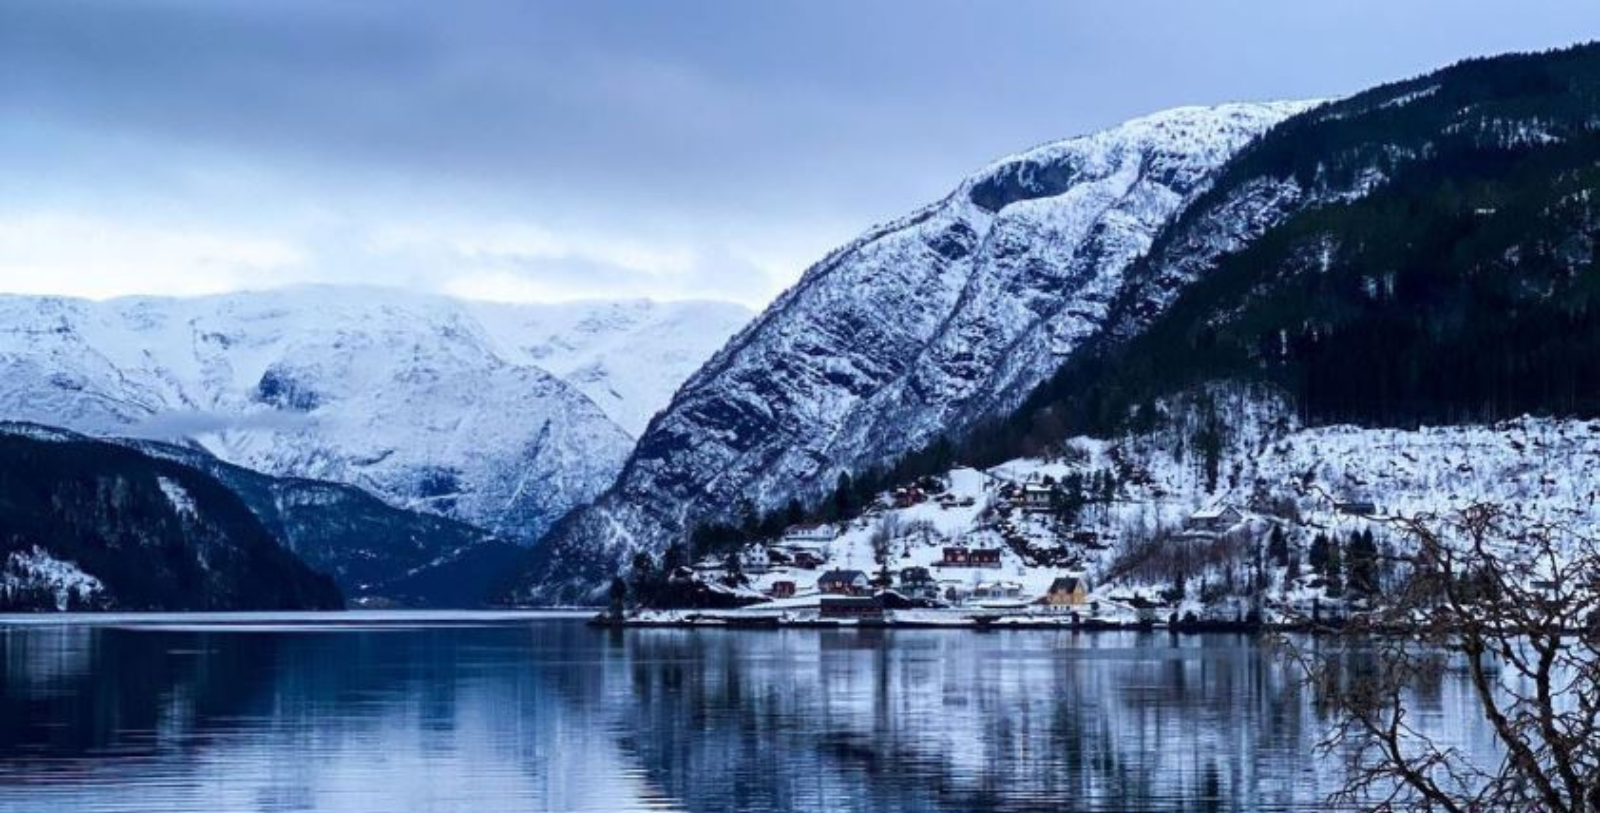 Embark on an adventure through the abundant natural beauty of Hardanger, home to such wonders as Norway’s second-longest fjord, its third-largest glacier, the majestic Vøringsfossen waterfall, and world-renowned apple orchards.